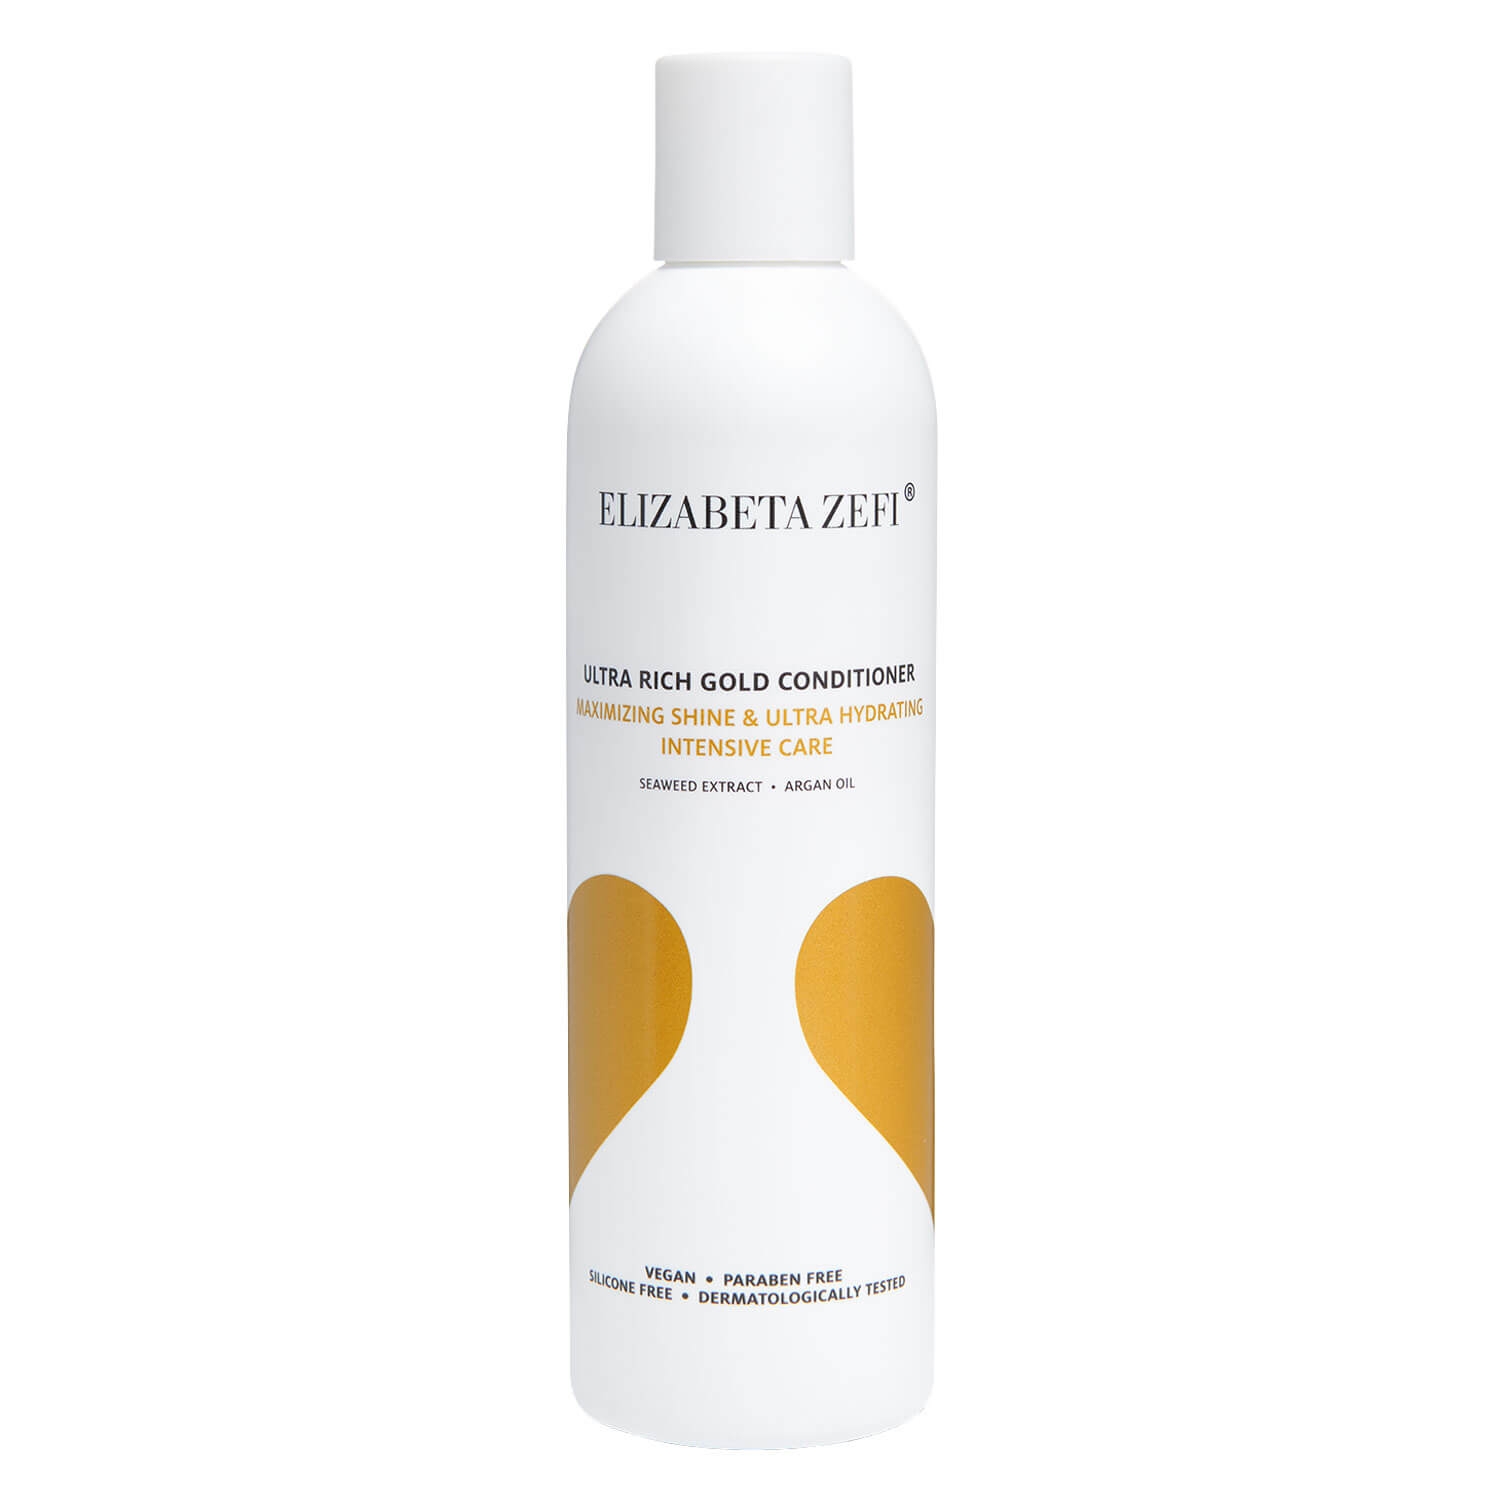 Product image from Elizabeta Zefi - Ultra Rich Gold Conditioner